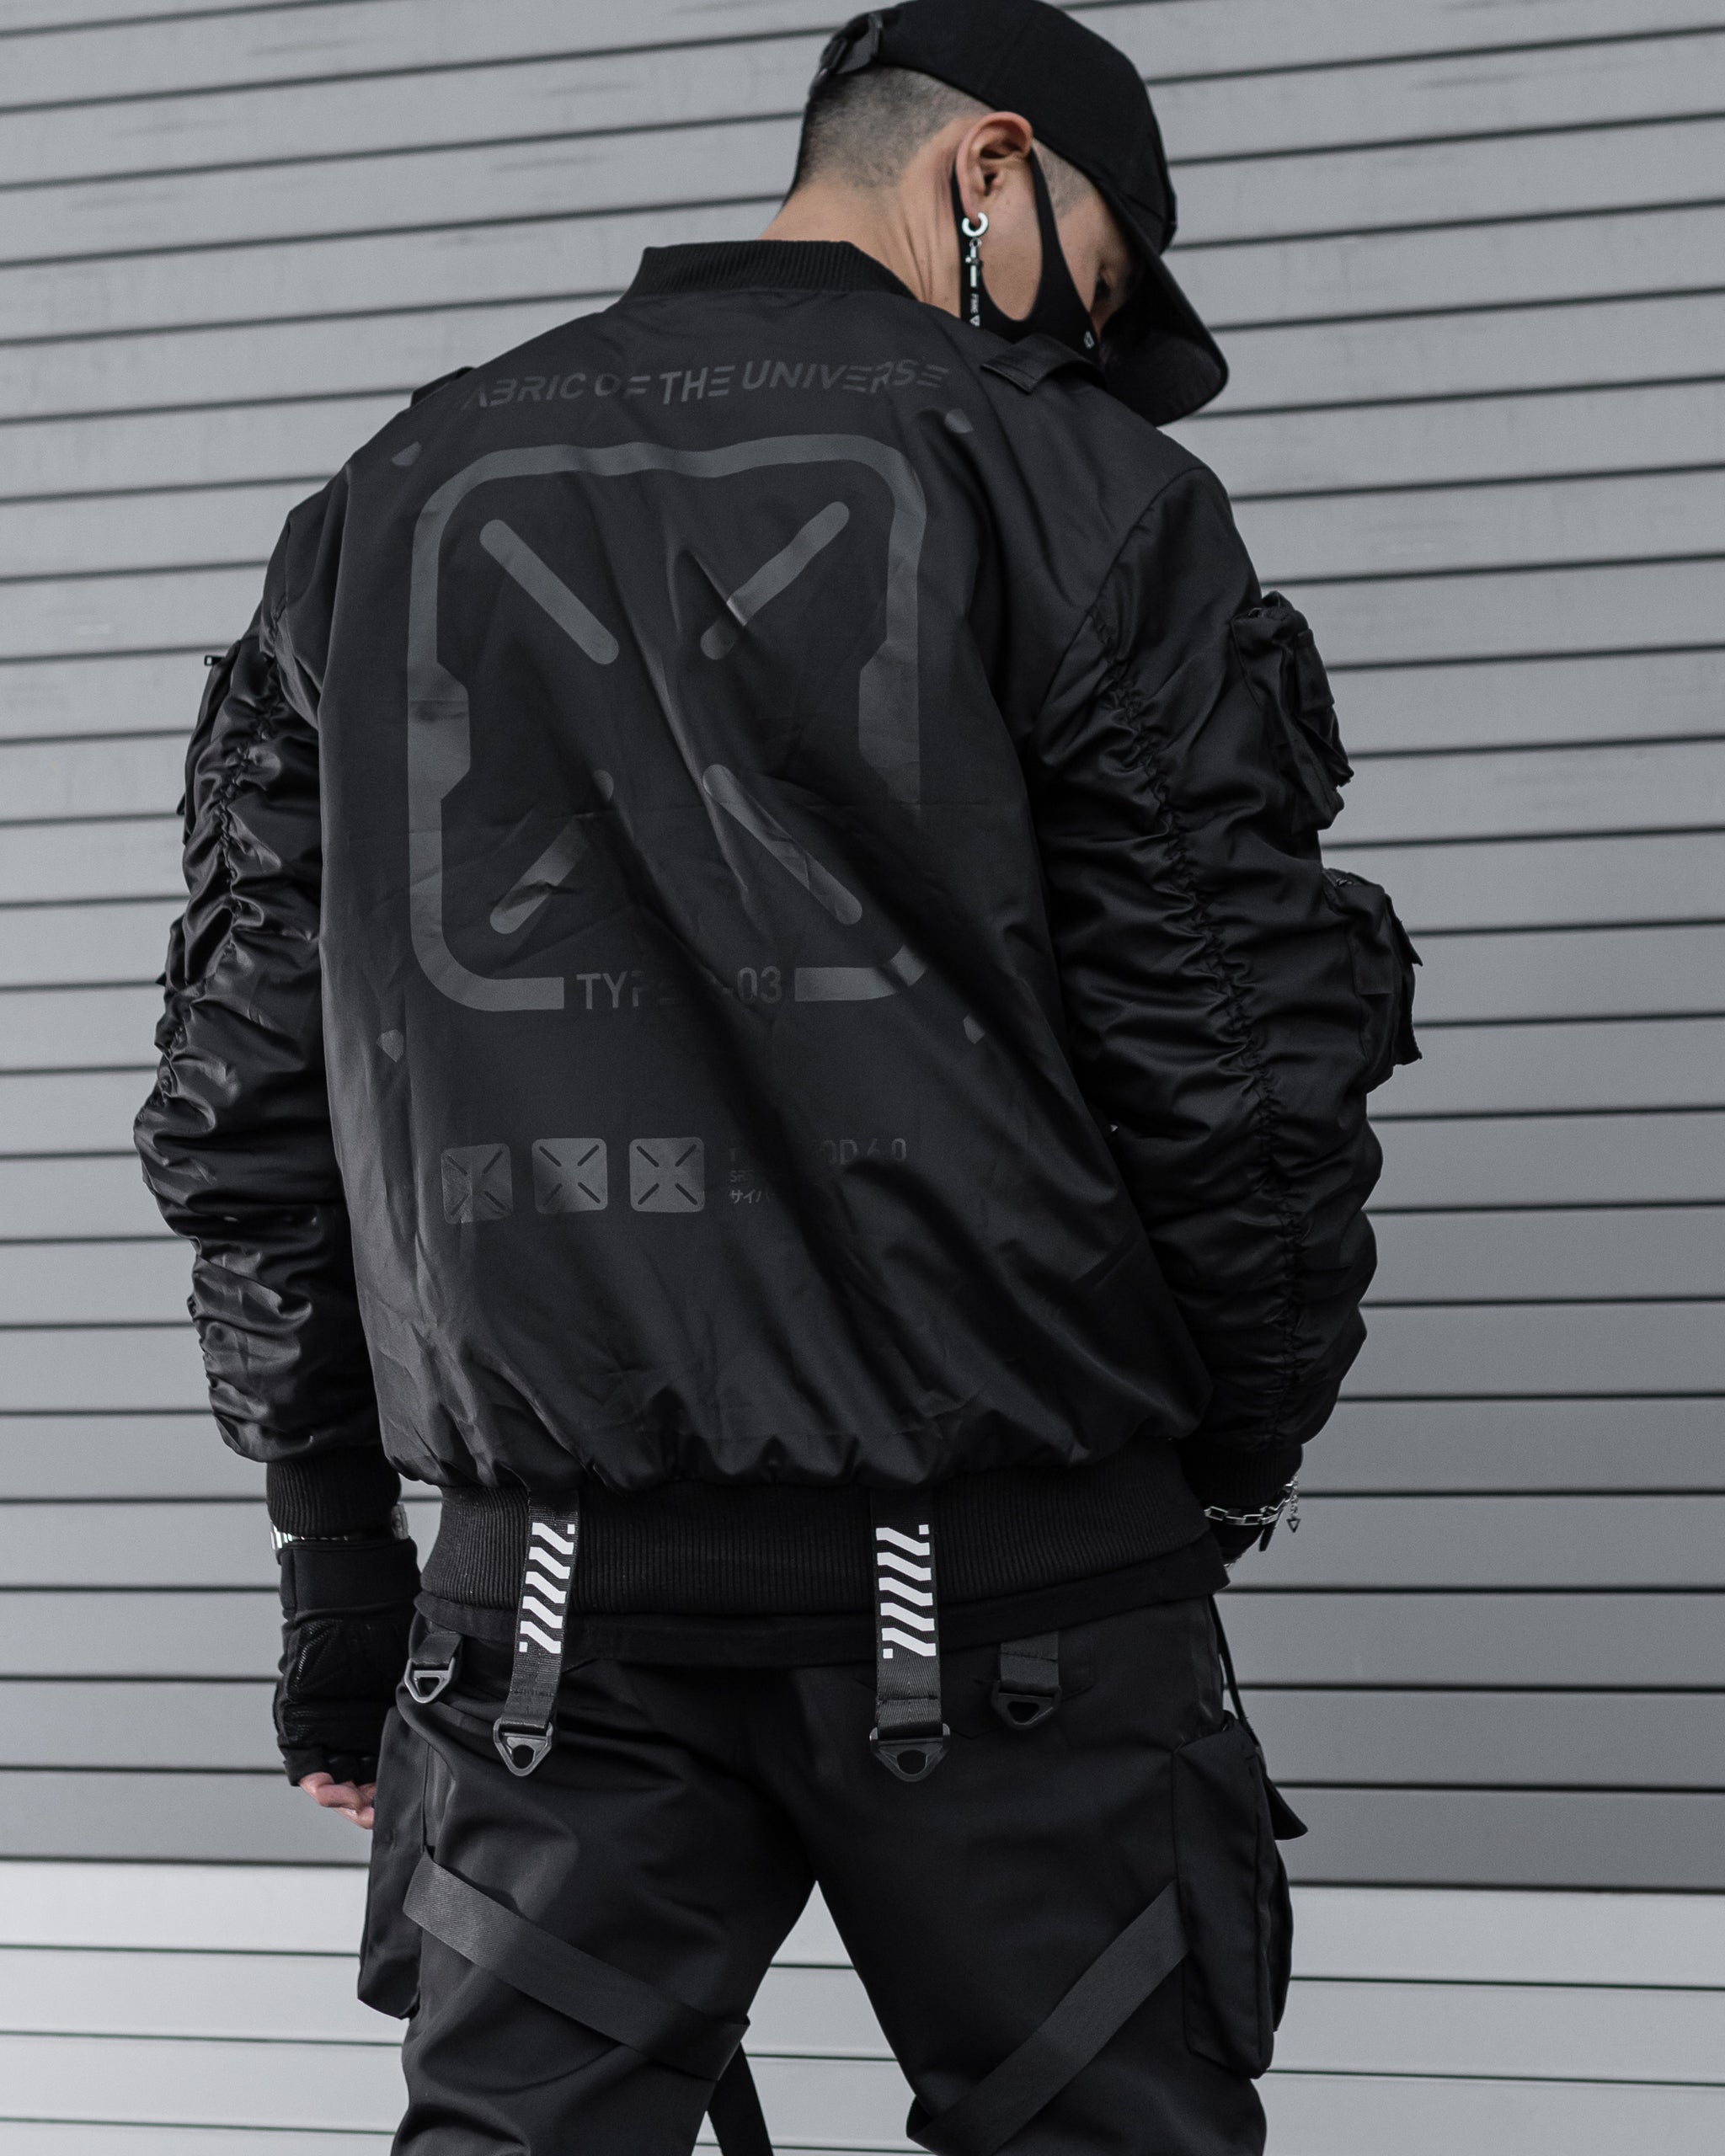 Black Stealth Universe XB-03 Bomber Jacket of - the Fabric